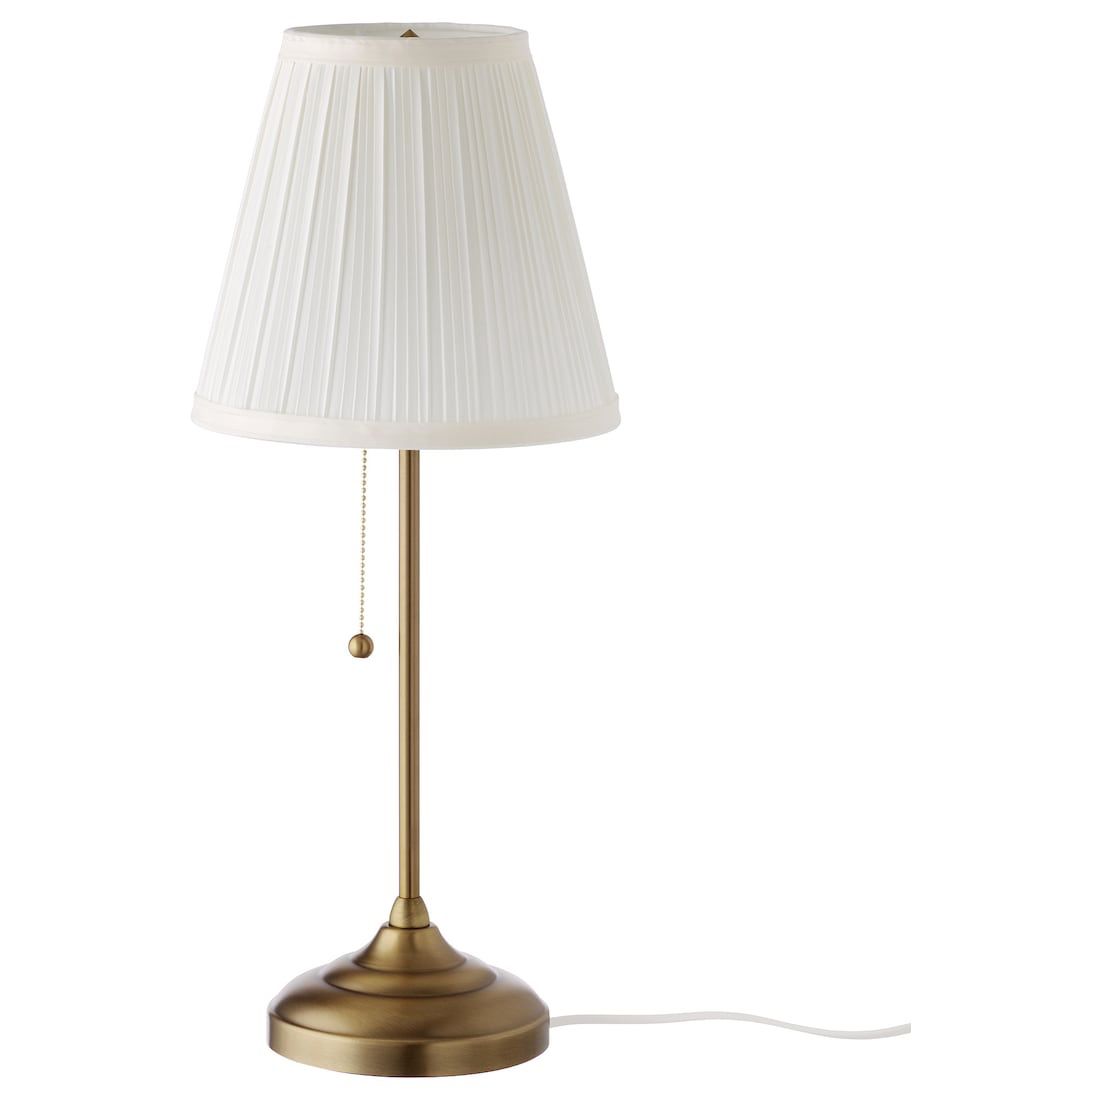 Ikea Arstrid Table Lamp, Brass (2 Available!)